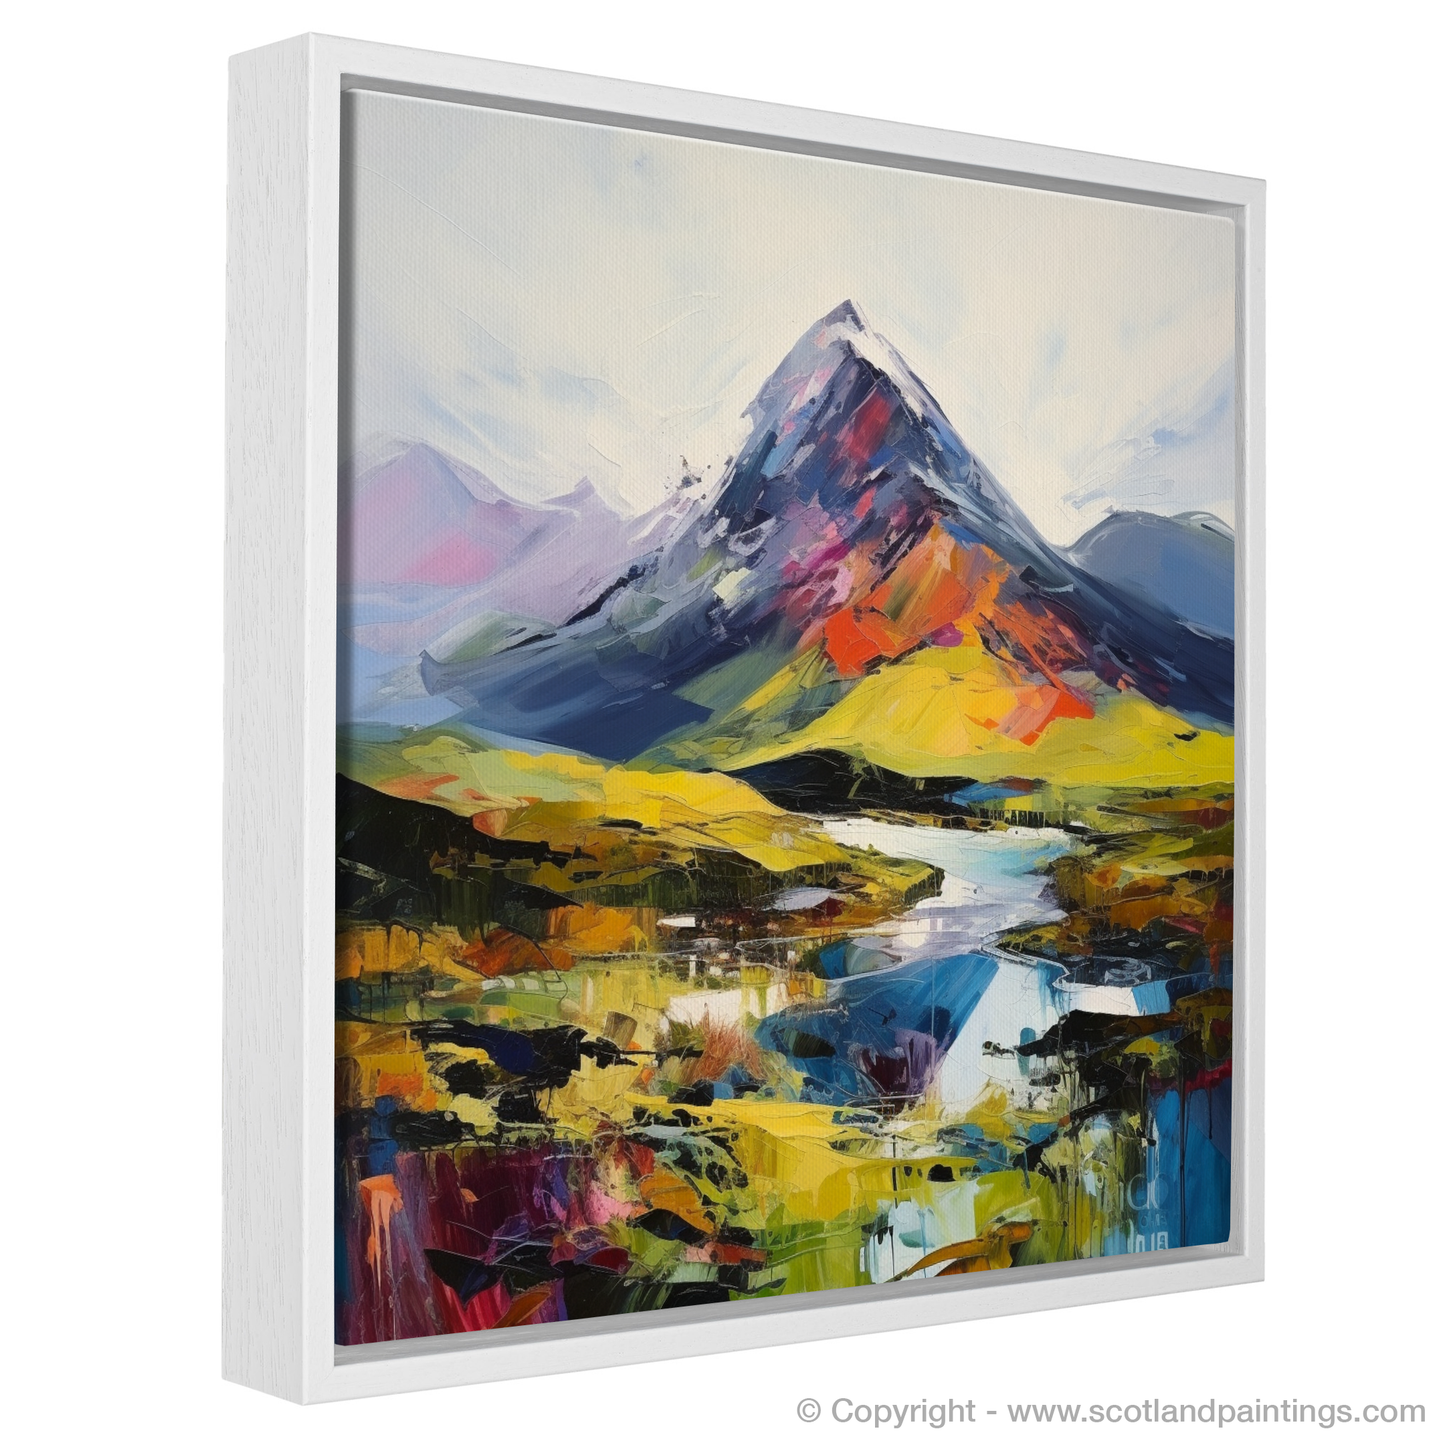 Painting and Art Print of Beinn Ghlas entitled "Beinn Ghlas: An Expressionist Ode to the Scottish Highlands".